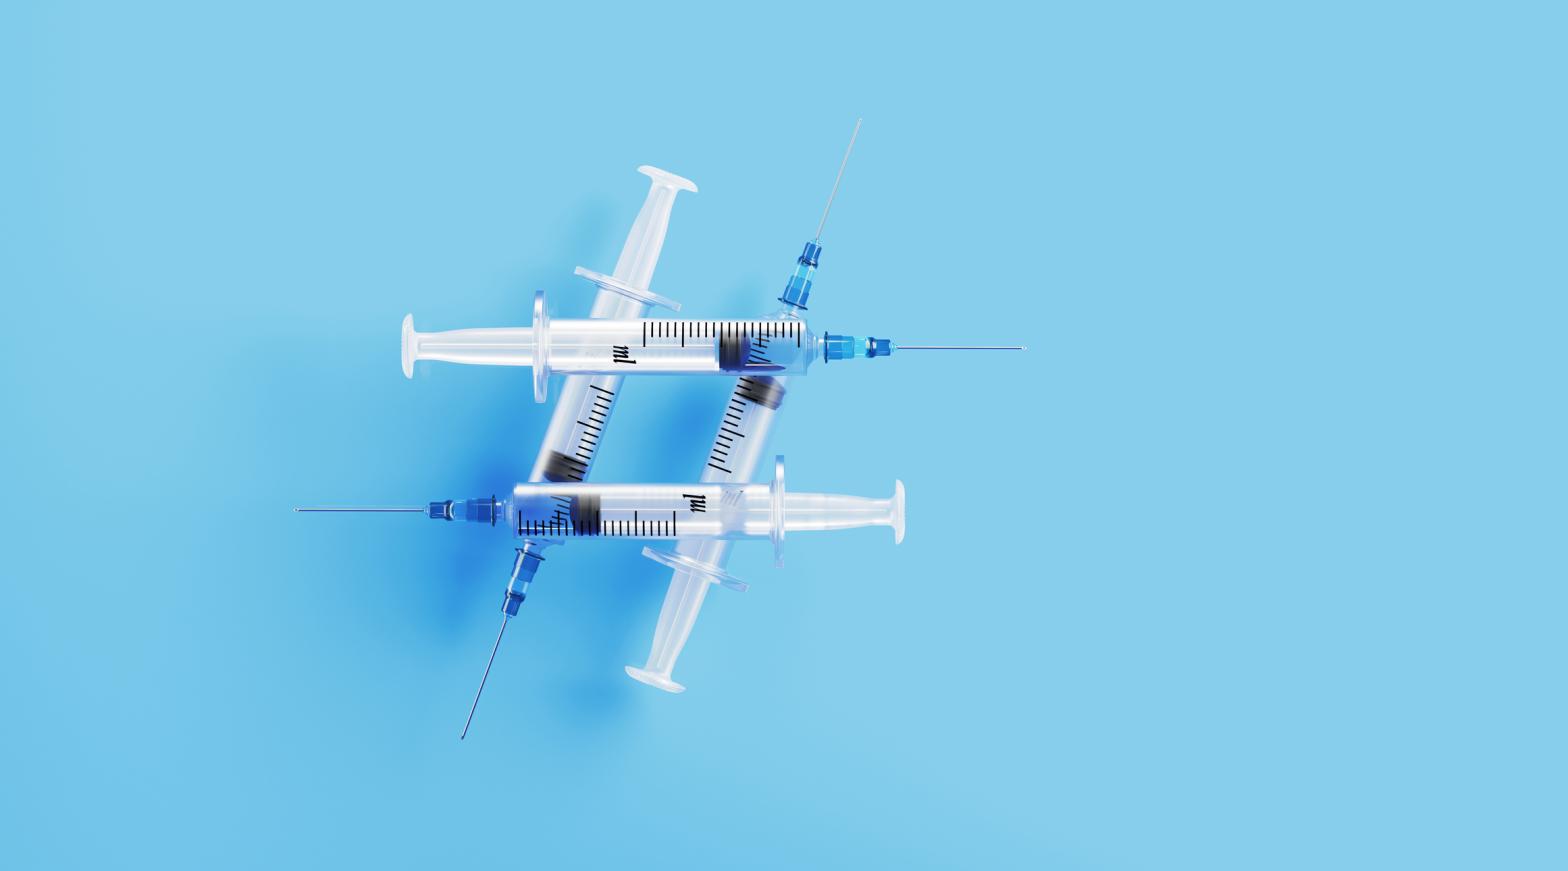 Facebook has a problem with anti-vaxx advertising